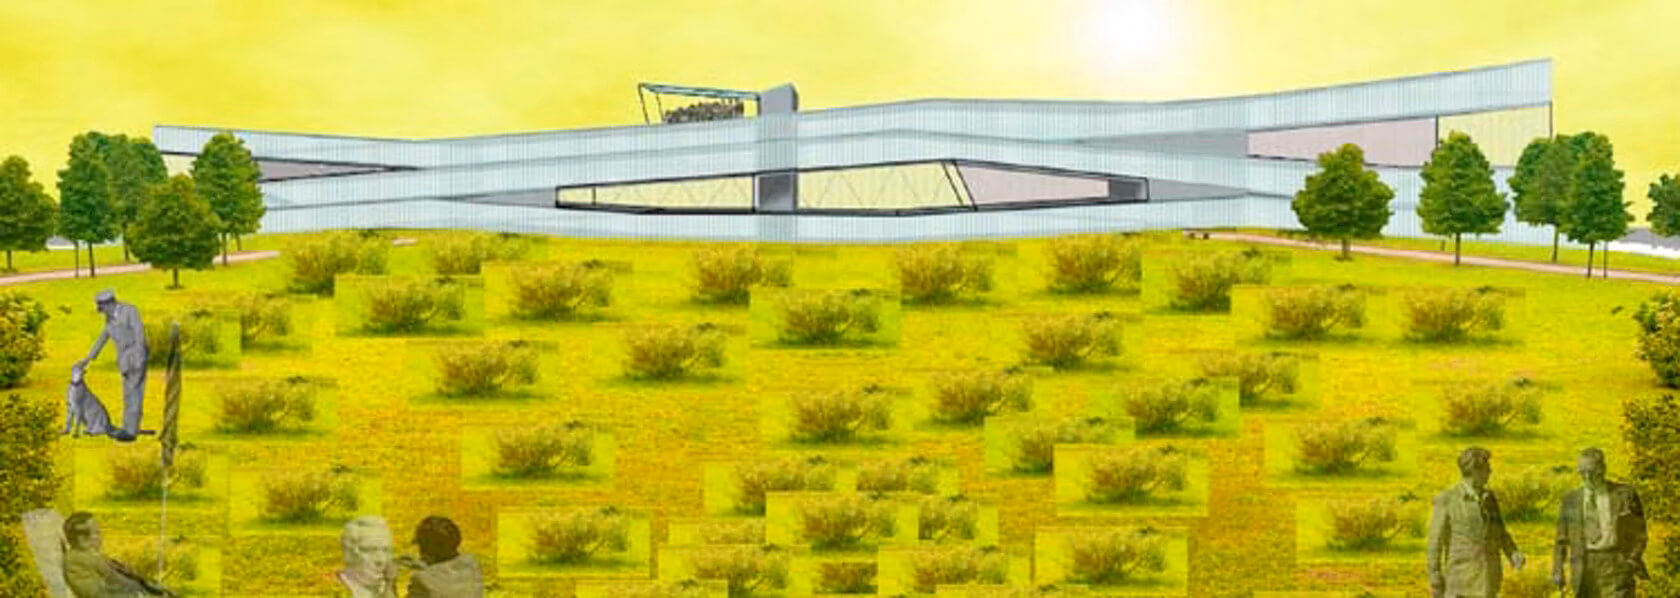 rendering of a long linear housing complex in a field of sunflowers